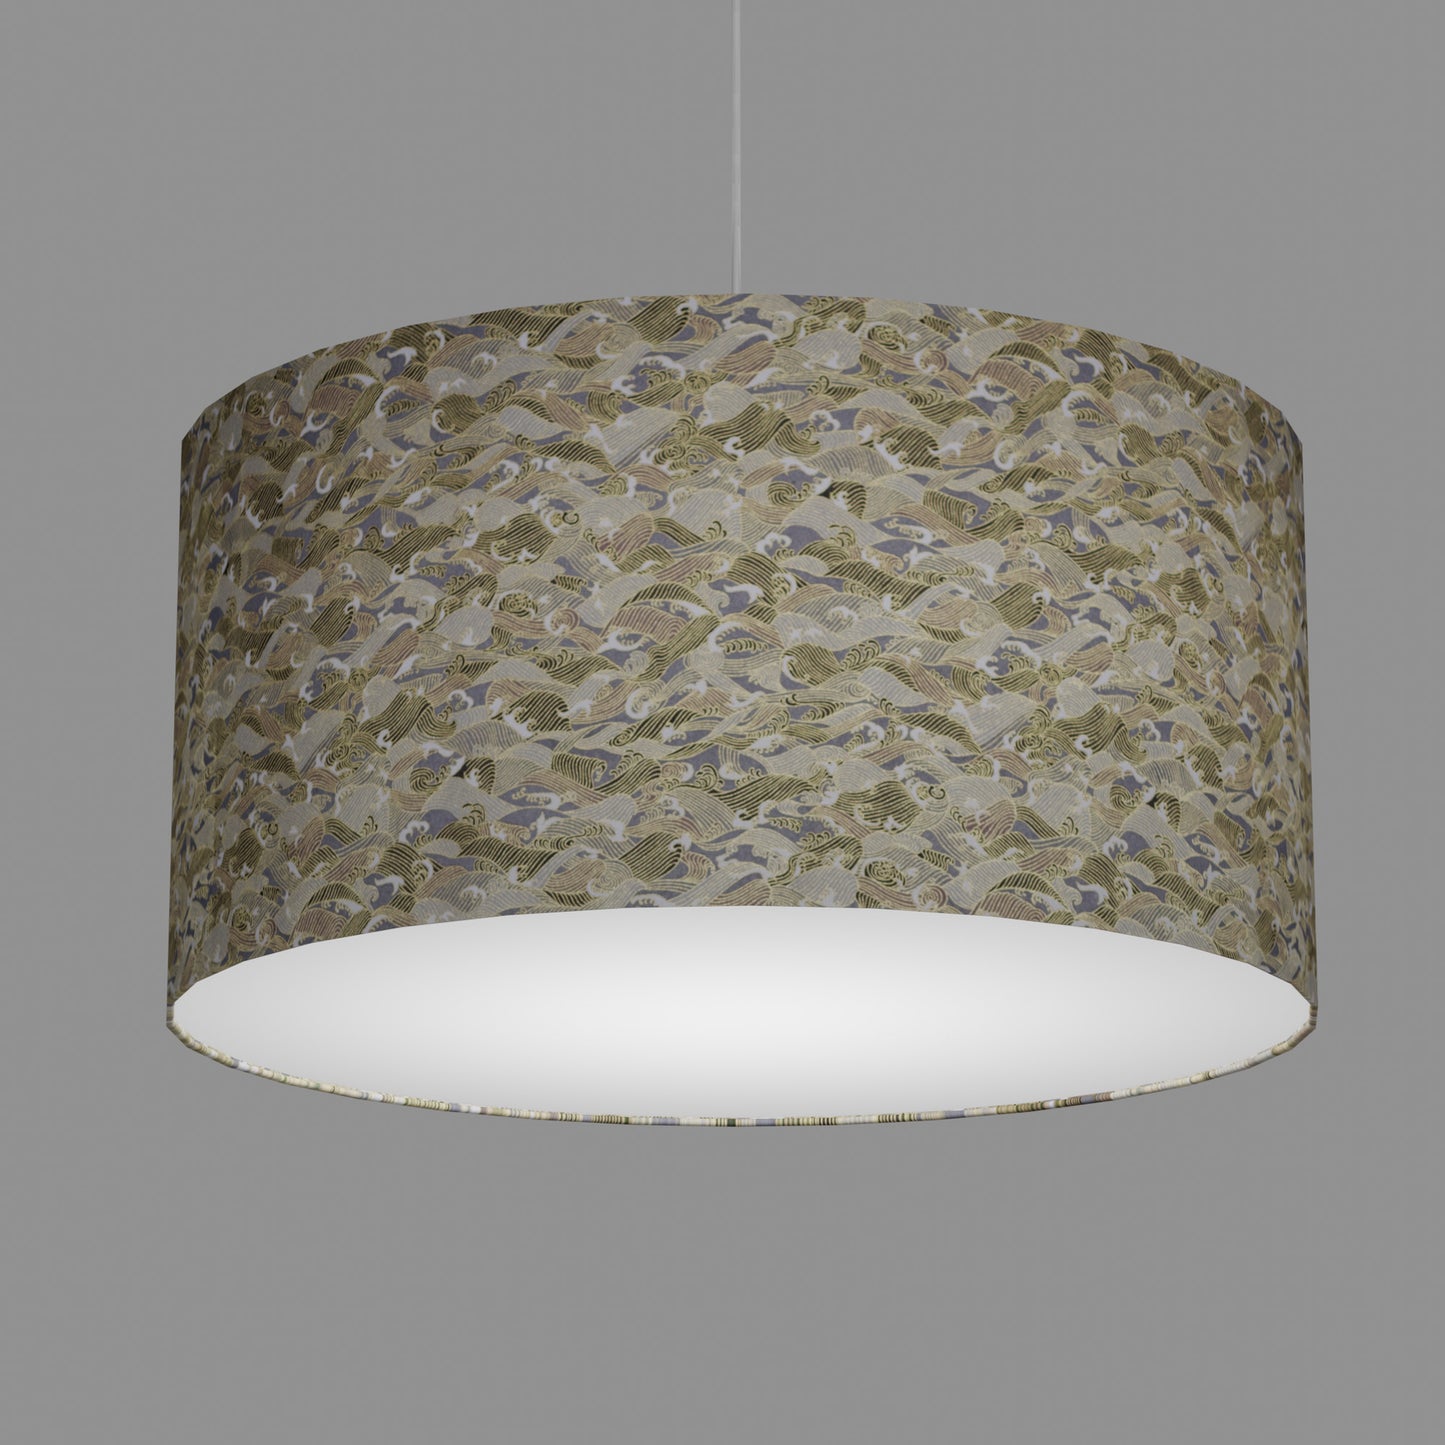 Drum Lamp Shade - W03 ~ Gold Waves on Greys, 60cm(d) x 30cm(h)